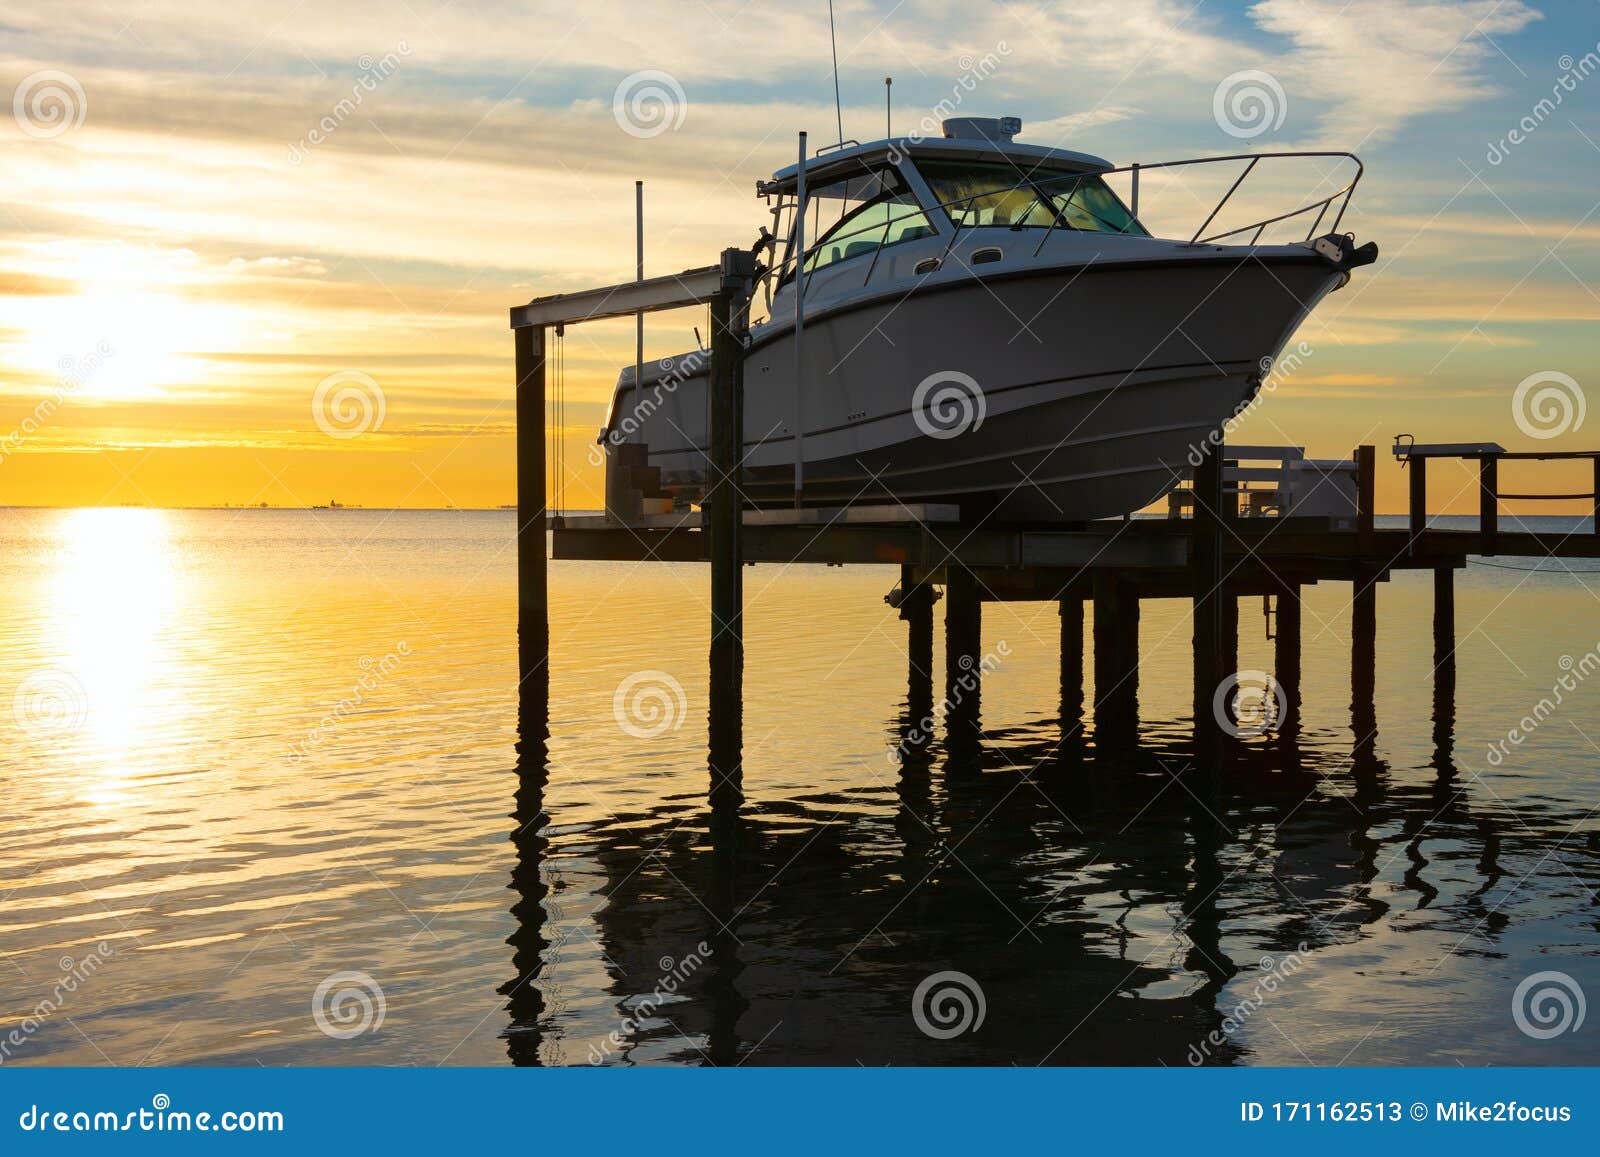 expensive fishing boat on motorized electric dock vessel lift at sunrise